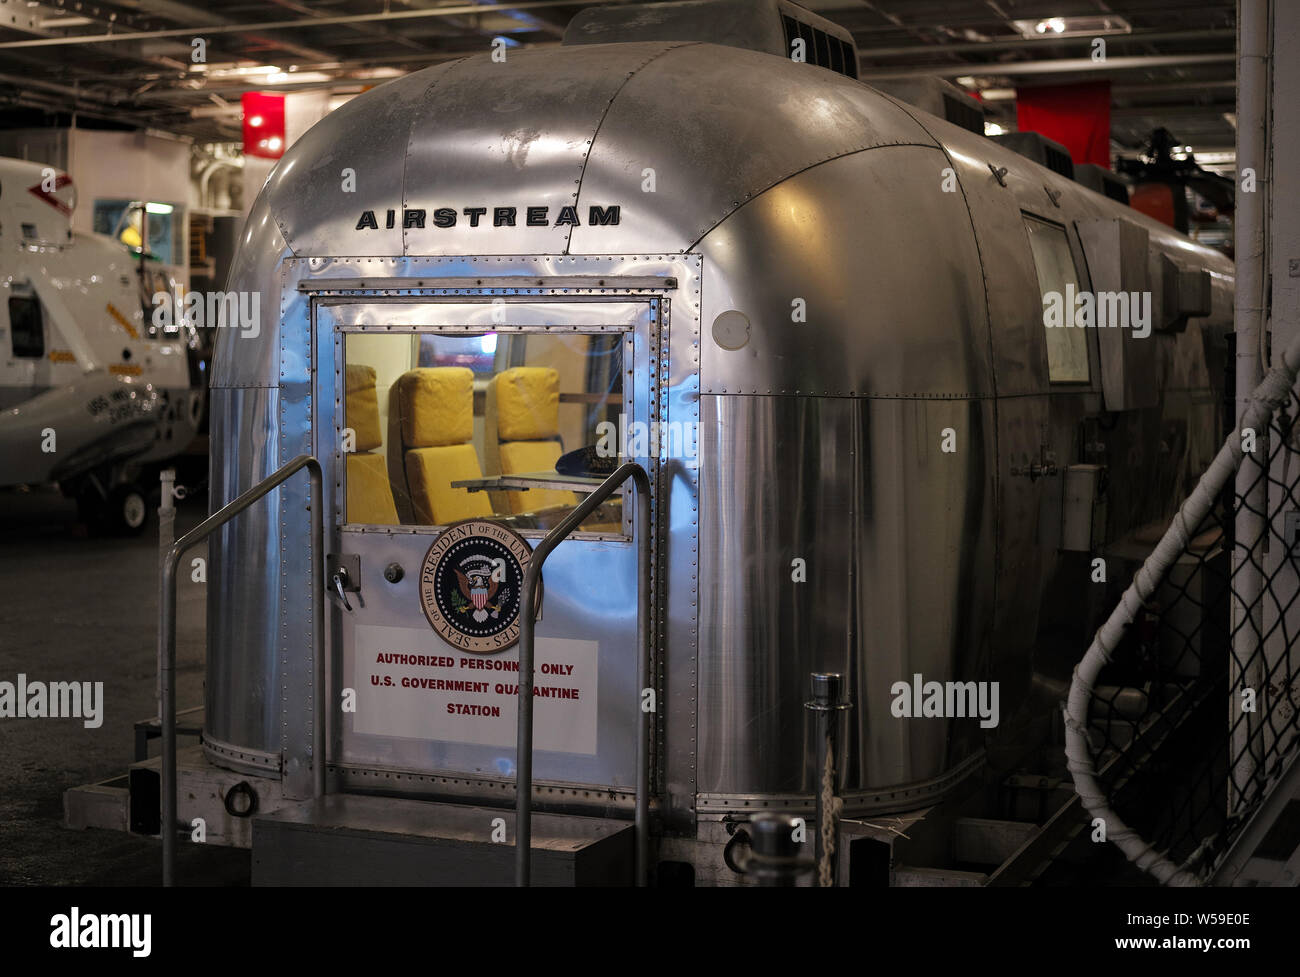 The mobile quarantine facility (MQF) is a converted Airstream trailer used by NASA to quarantine astronauts returning from Apollo lunar missions. Stock Photo